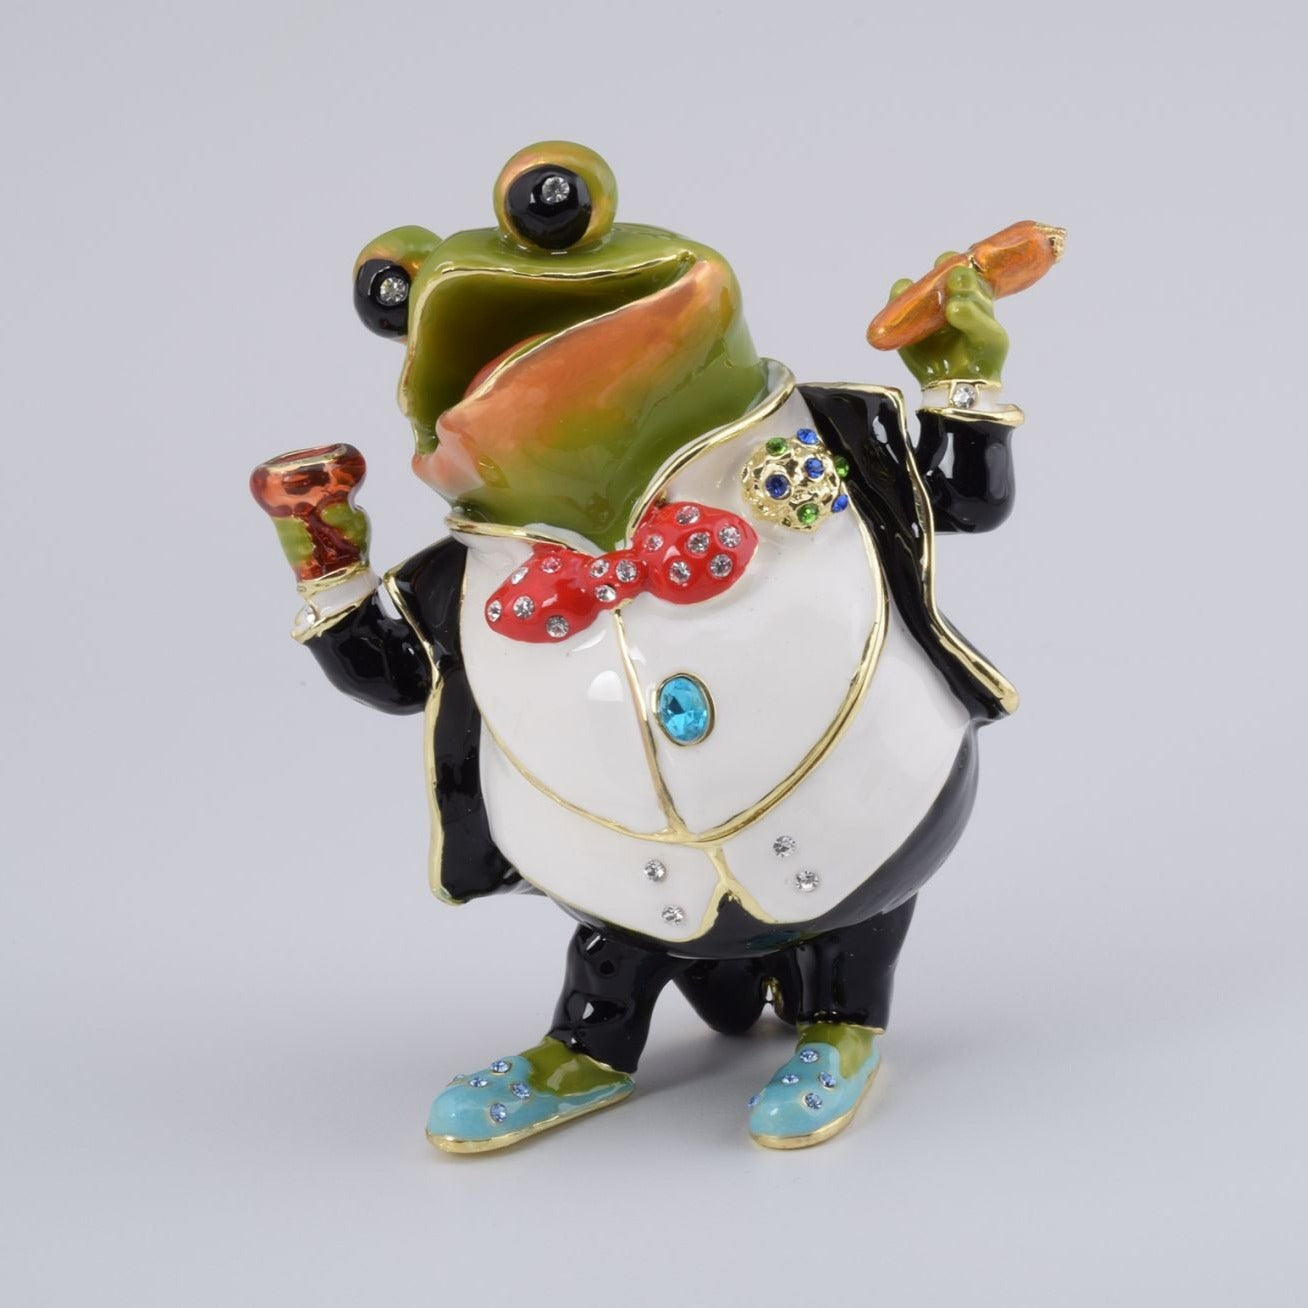 Business Frog Holding a Cigar